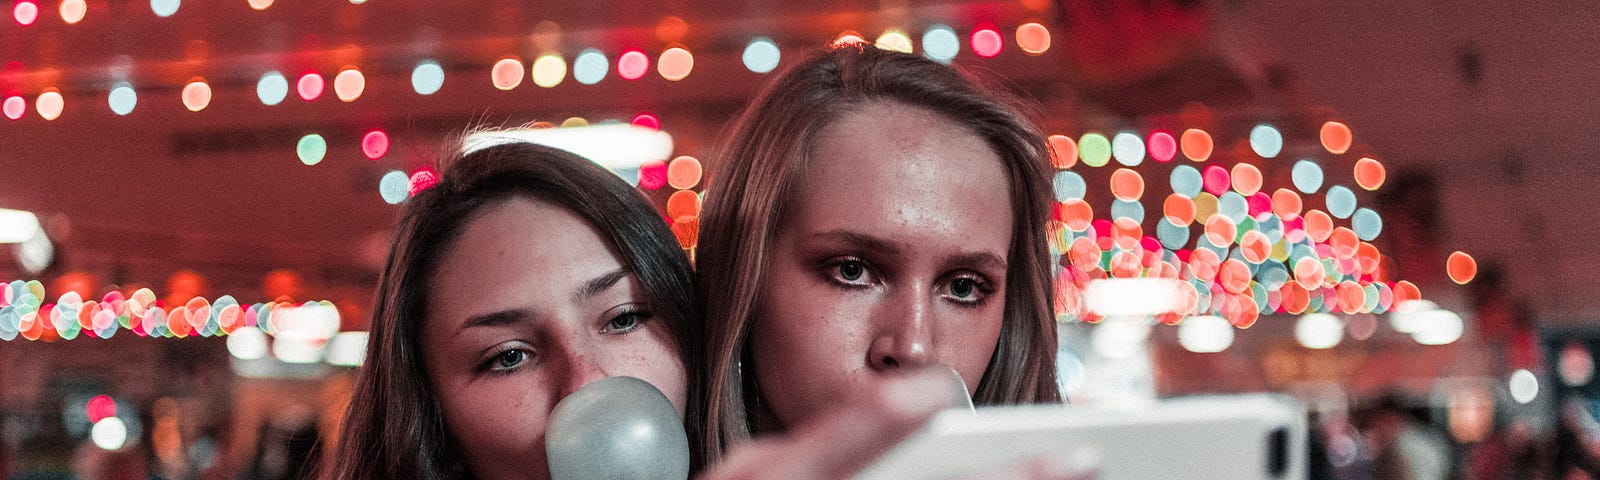 Two girls at a party taking a selfie